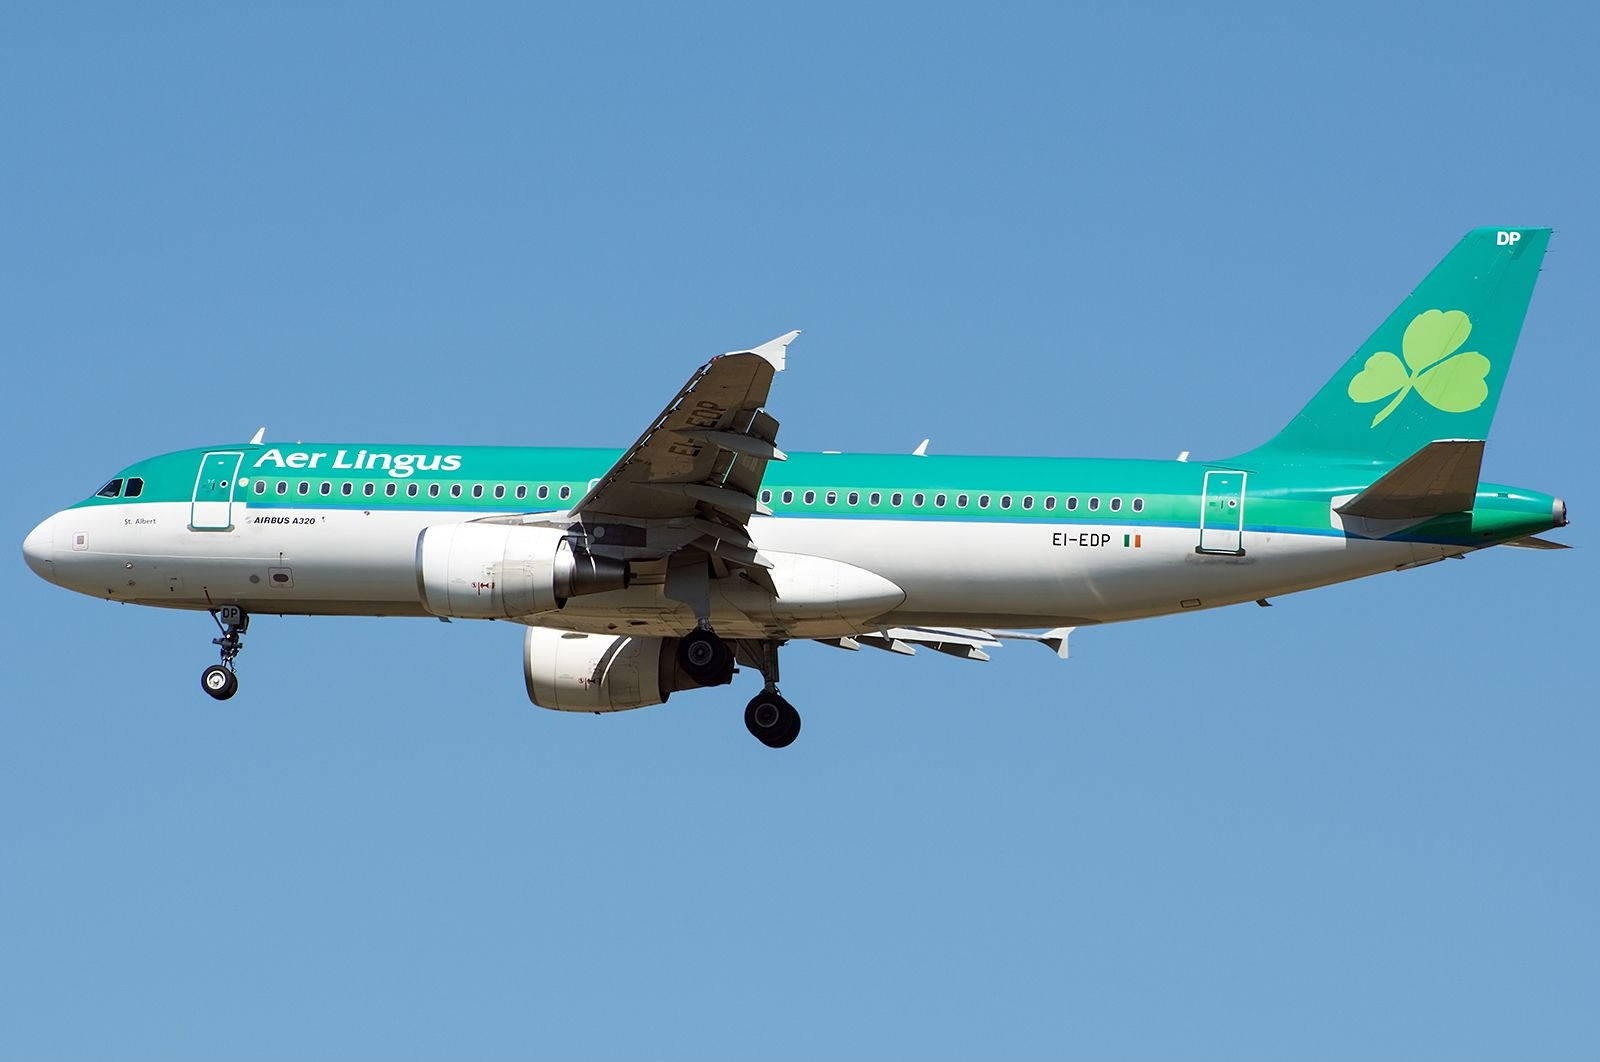 Winging Of Aer Lingus Airplane Picture